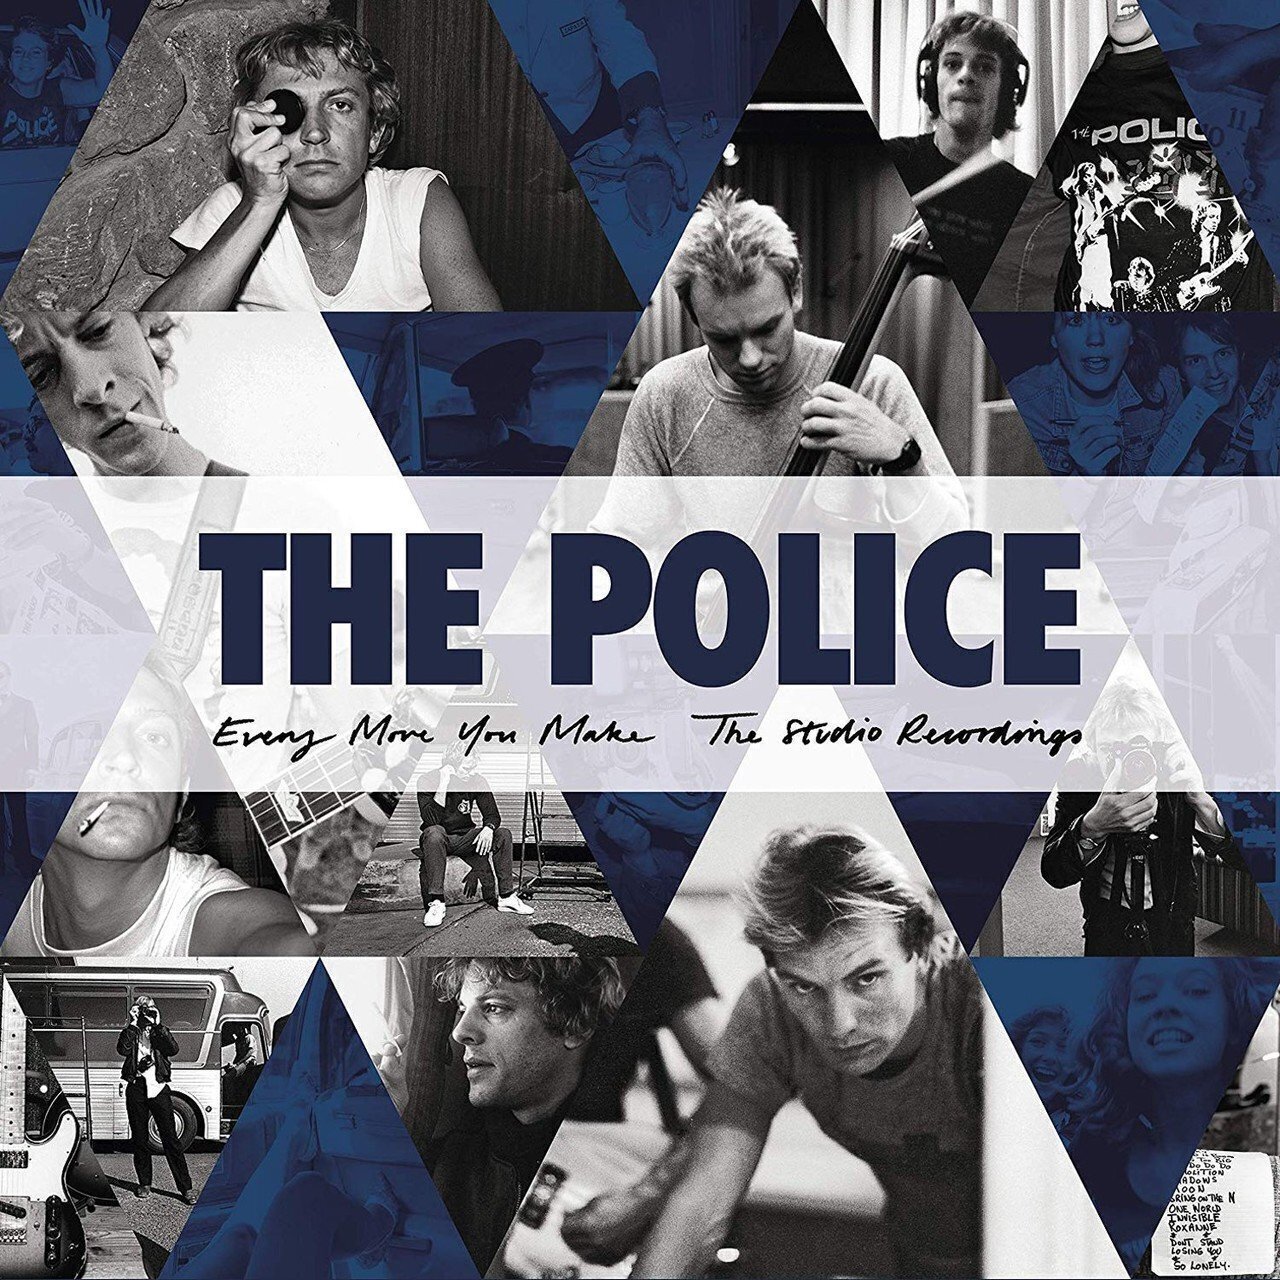 The Police – Every Move You Make: The Studio Recordings (2018) [FLAC 24bit/96kHz]